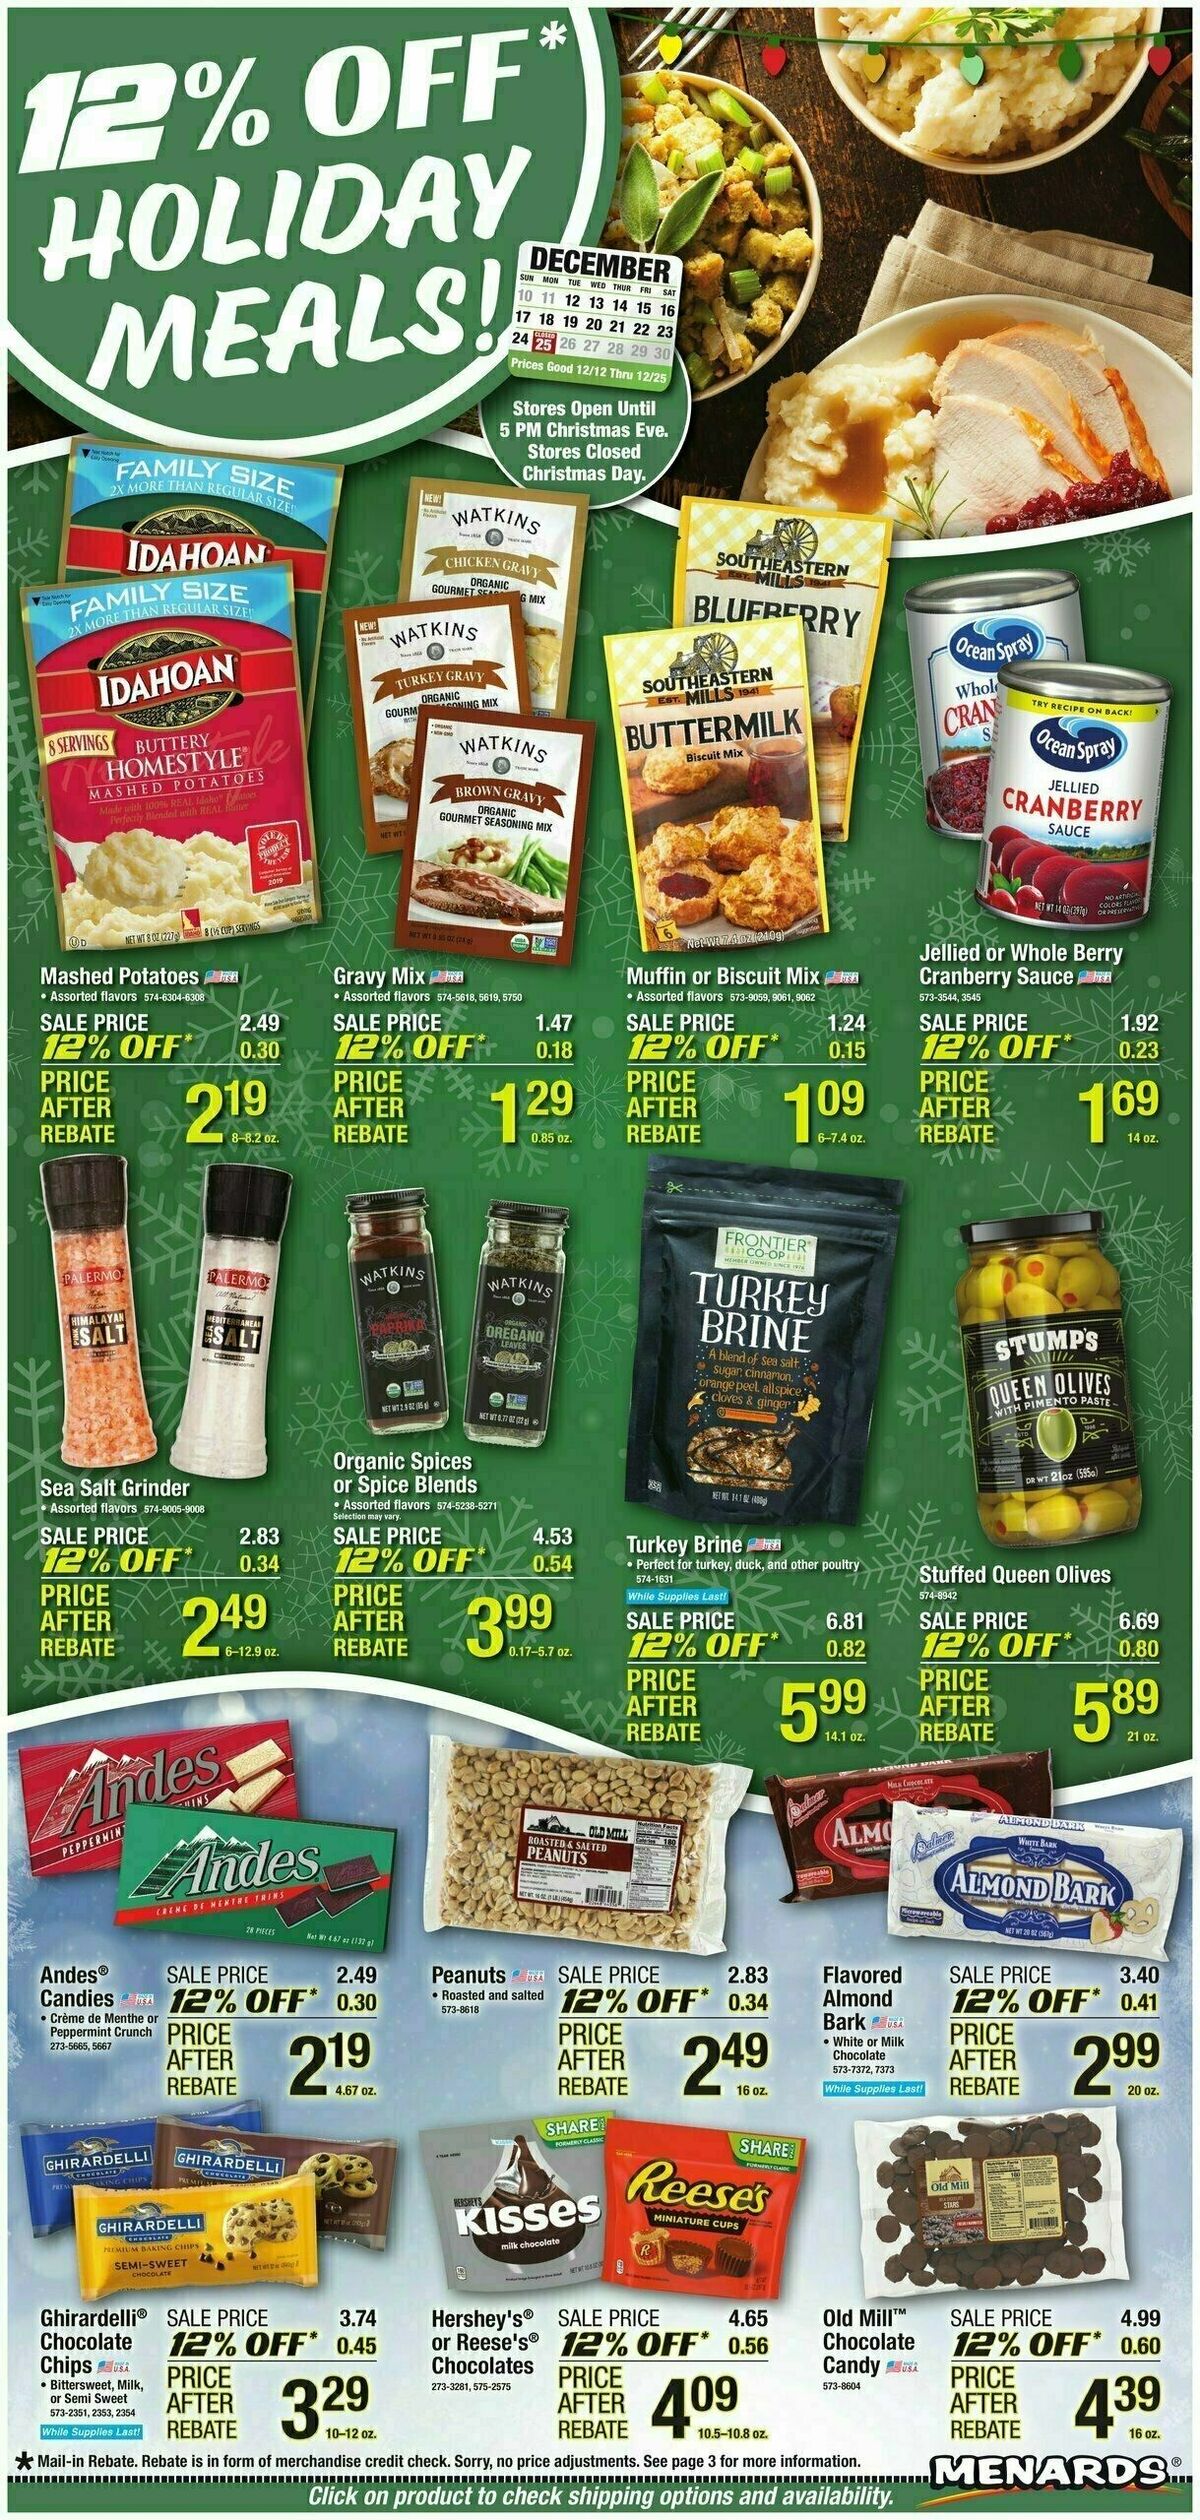 Menards Home Essentials Weekly Ad from December 12